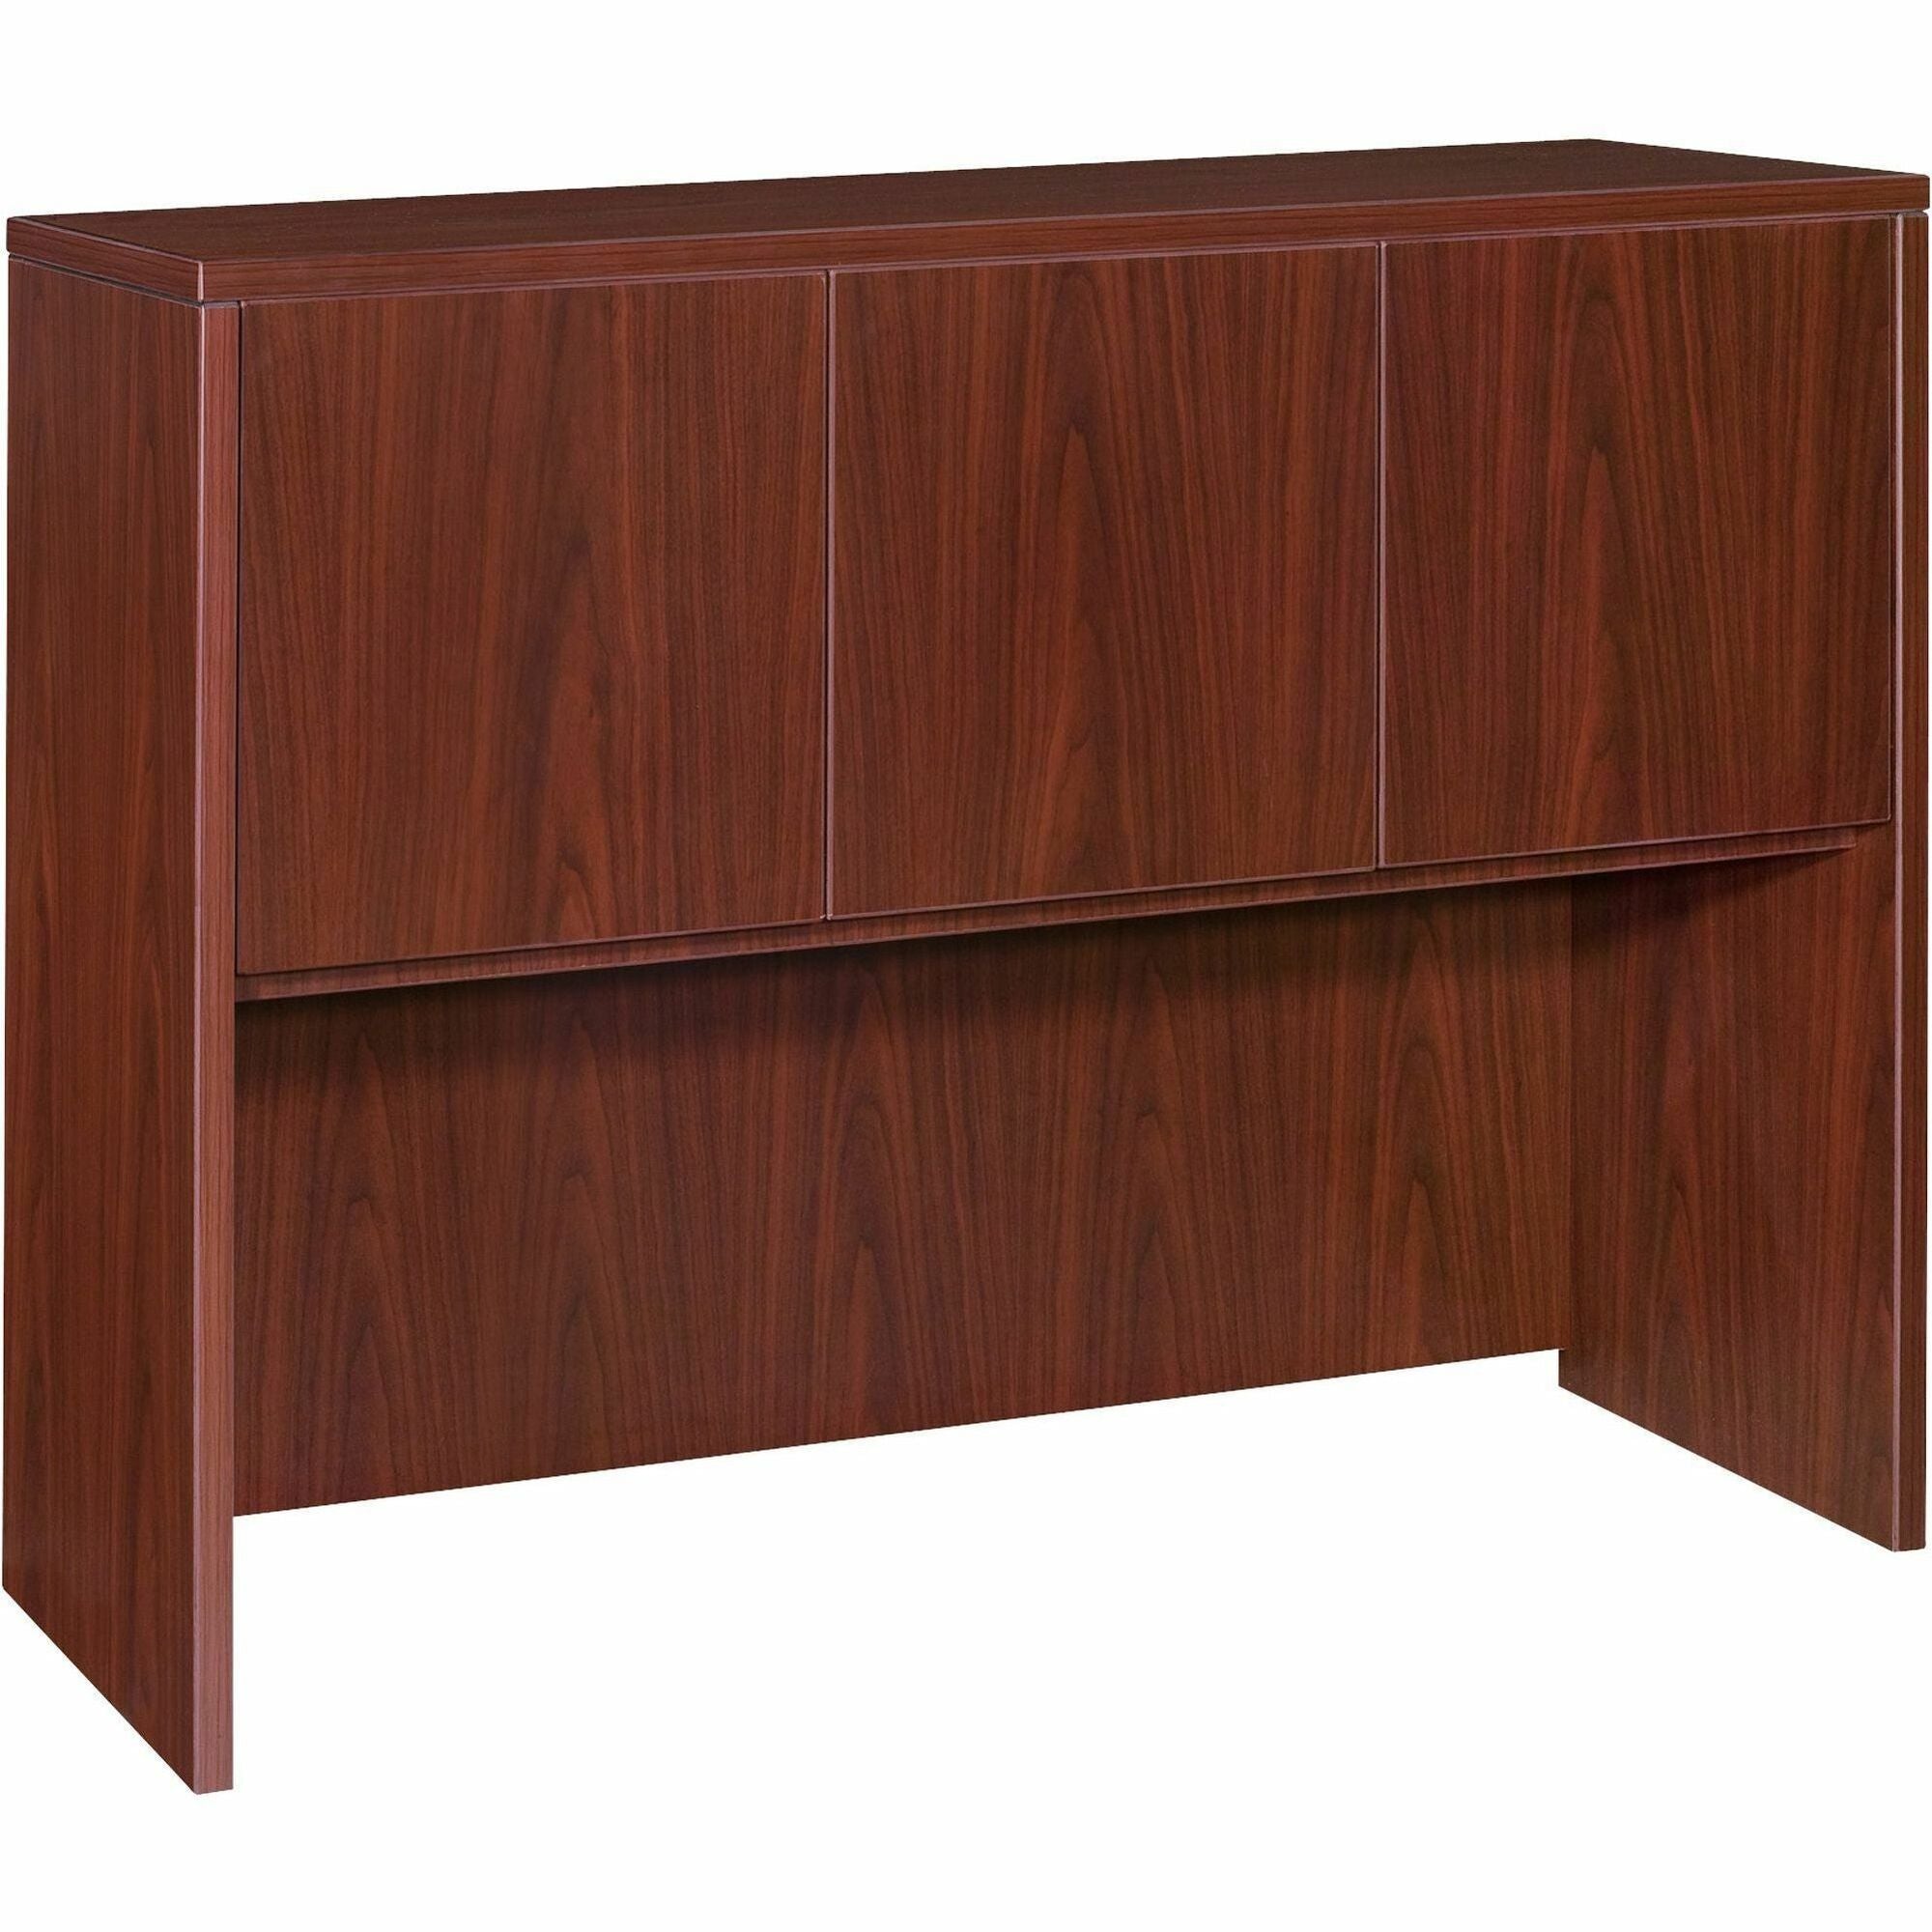 lorell-essentials-series-stack-on-hutch-with-doors-473-x-148-x-36-3-doors-finish-laminate-mahogany-grommet-cord-management-durable_llr69384 - 1